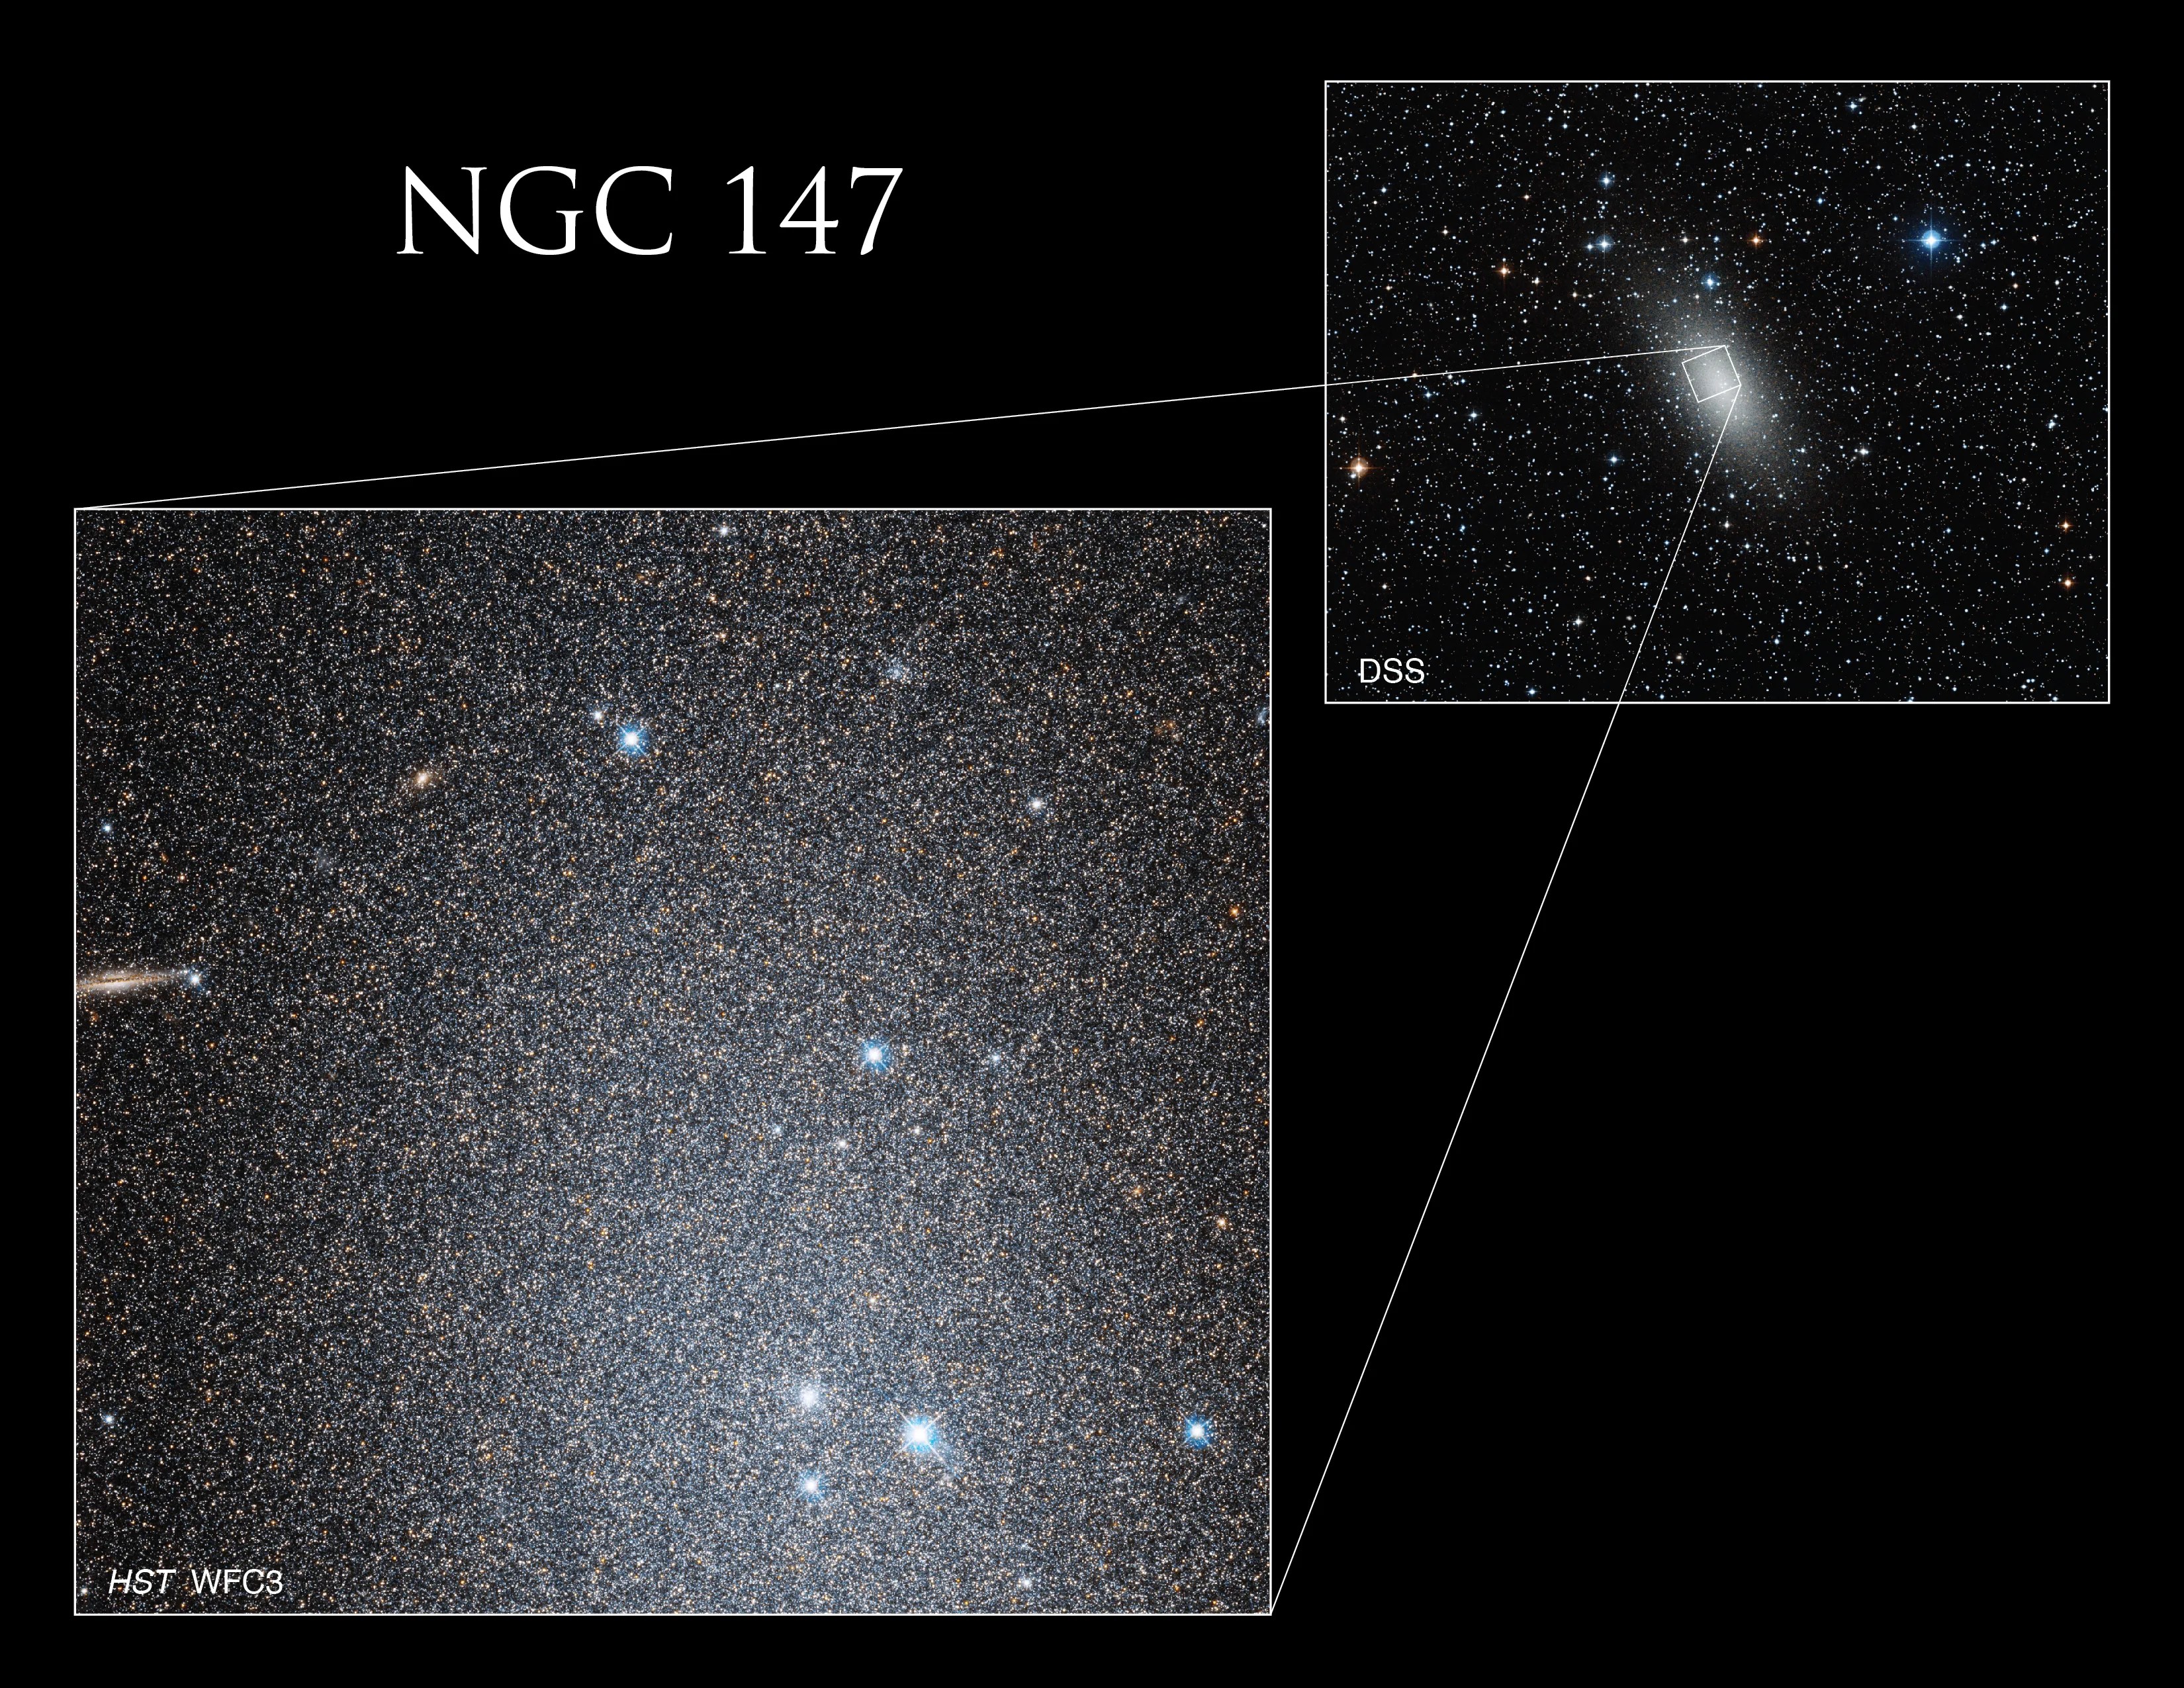 In the upper right, a ground-based image from the Digitized Sky Survey (DSS) shows Caldwell 17 (NGC 147).